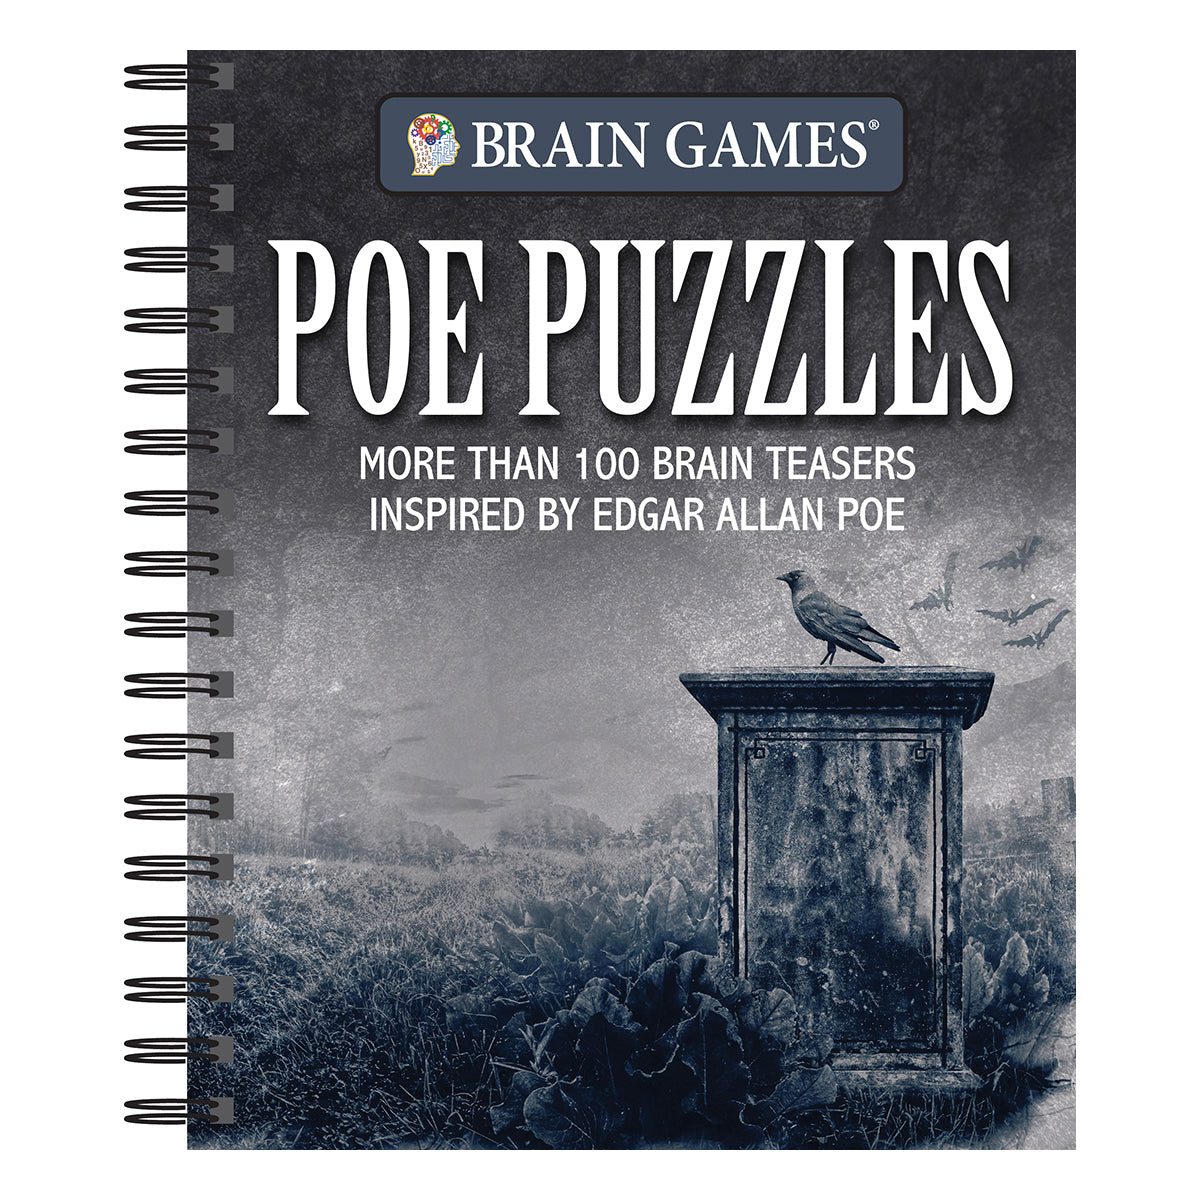 Brain Games  Poe Puzzles More Than 100 Brain Teasers Inspired by Edgar Allan Poe